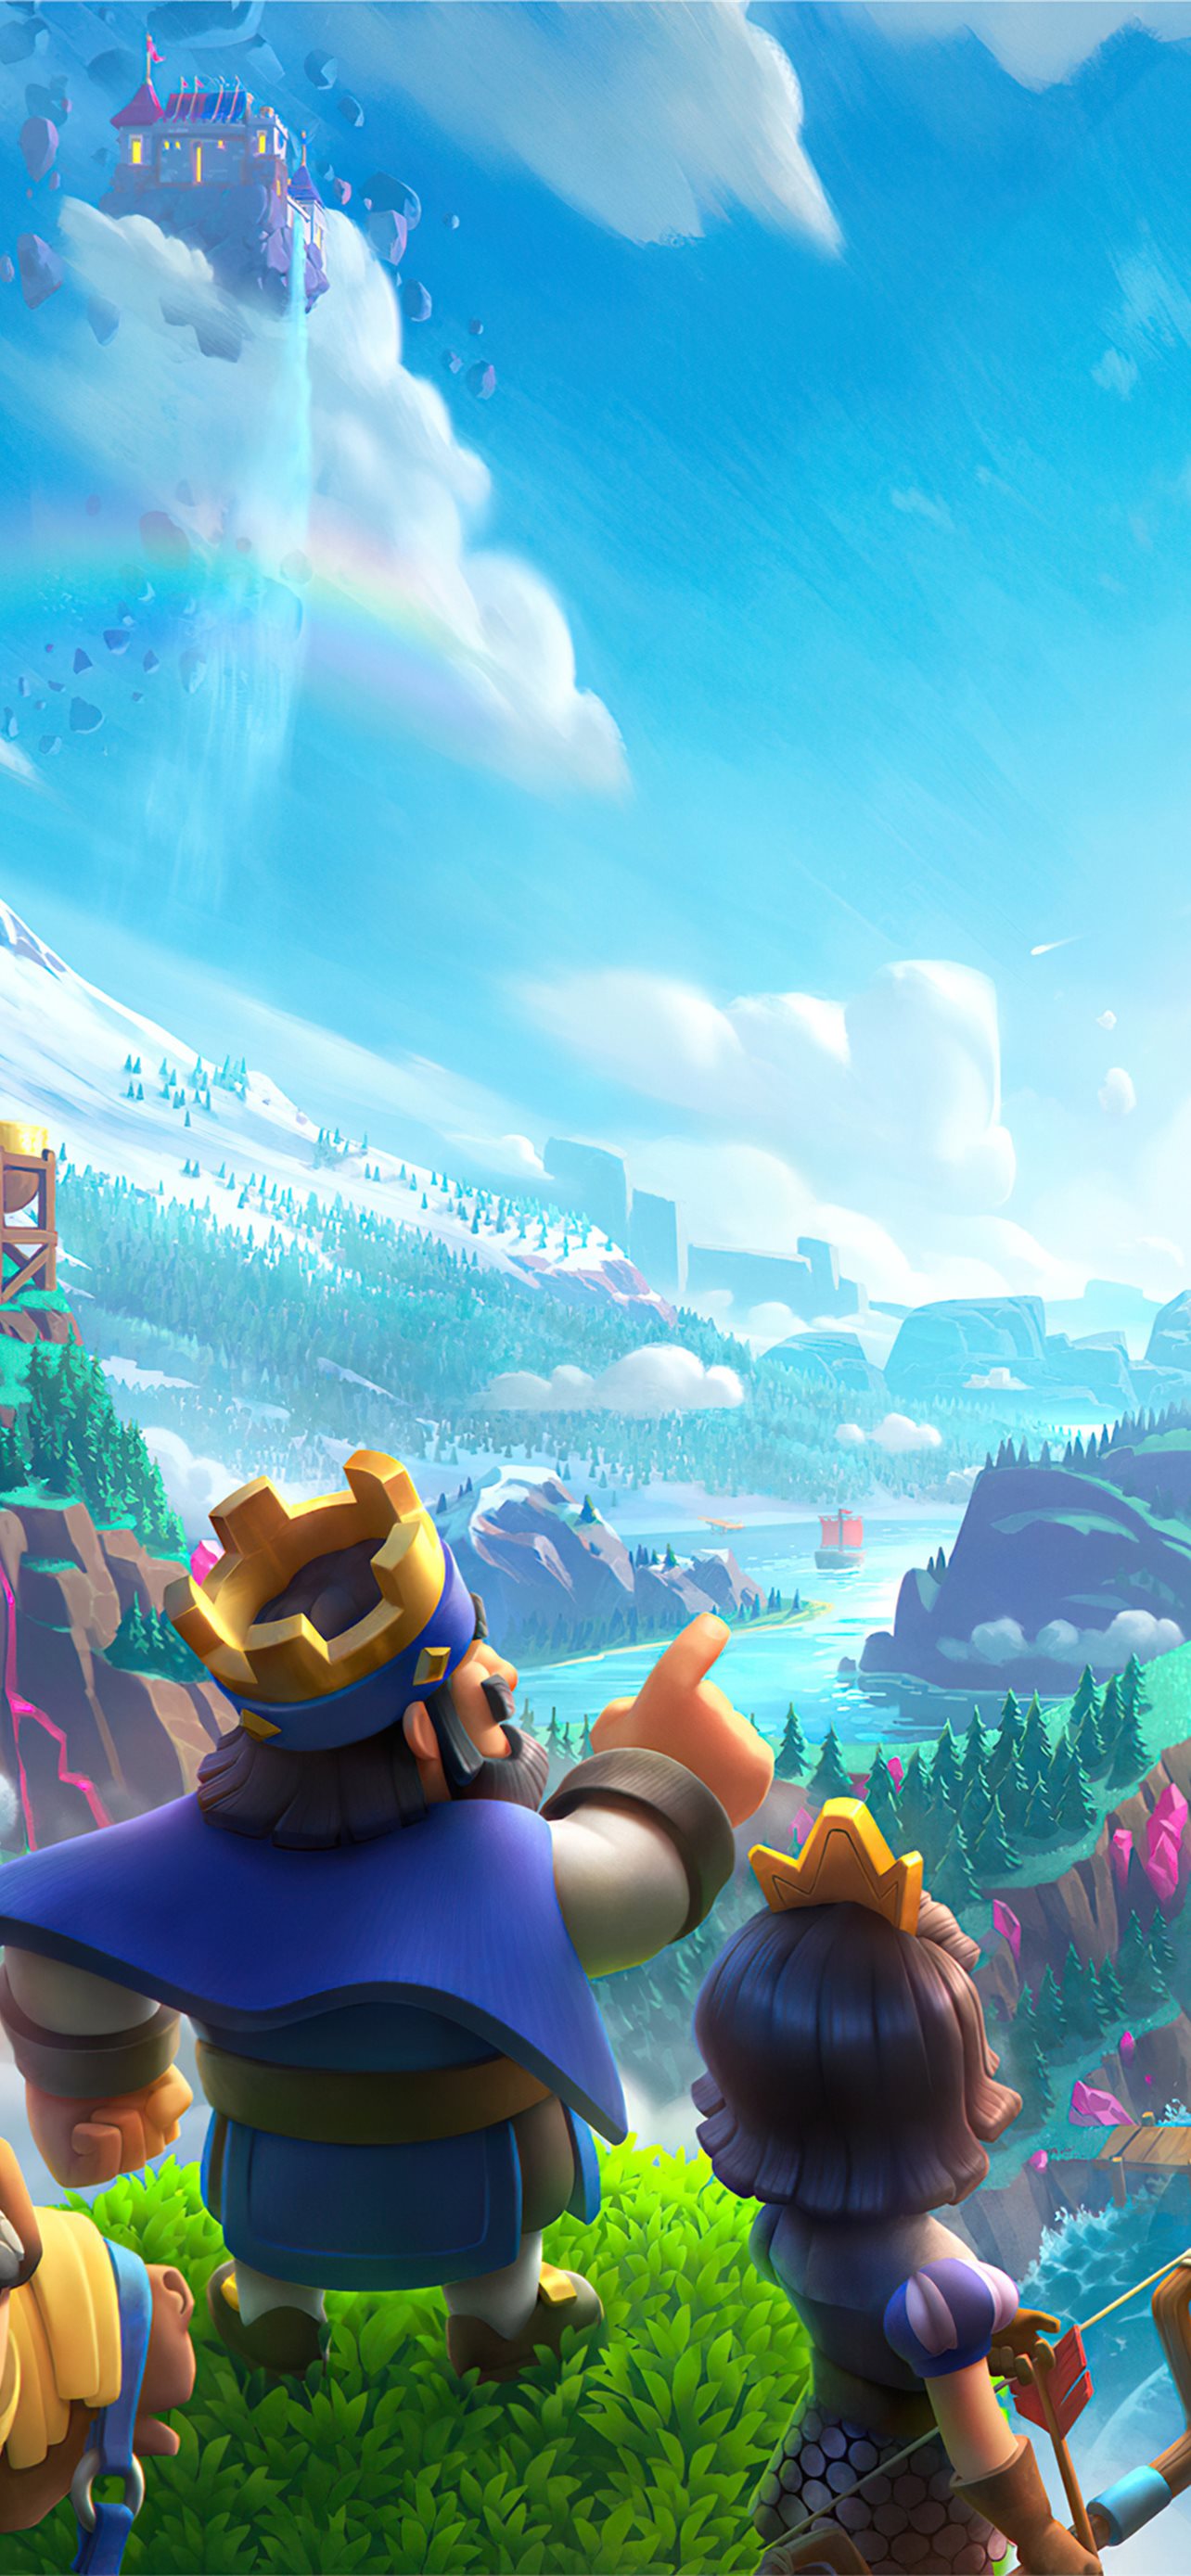 Top 999+ Clash Royale Wallpaper Full HD, 4K✓Free to Use